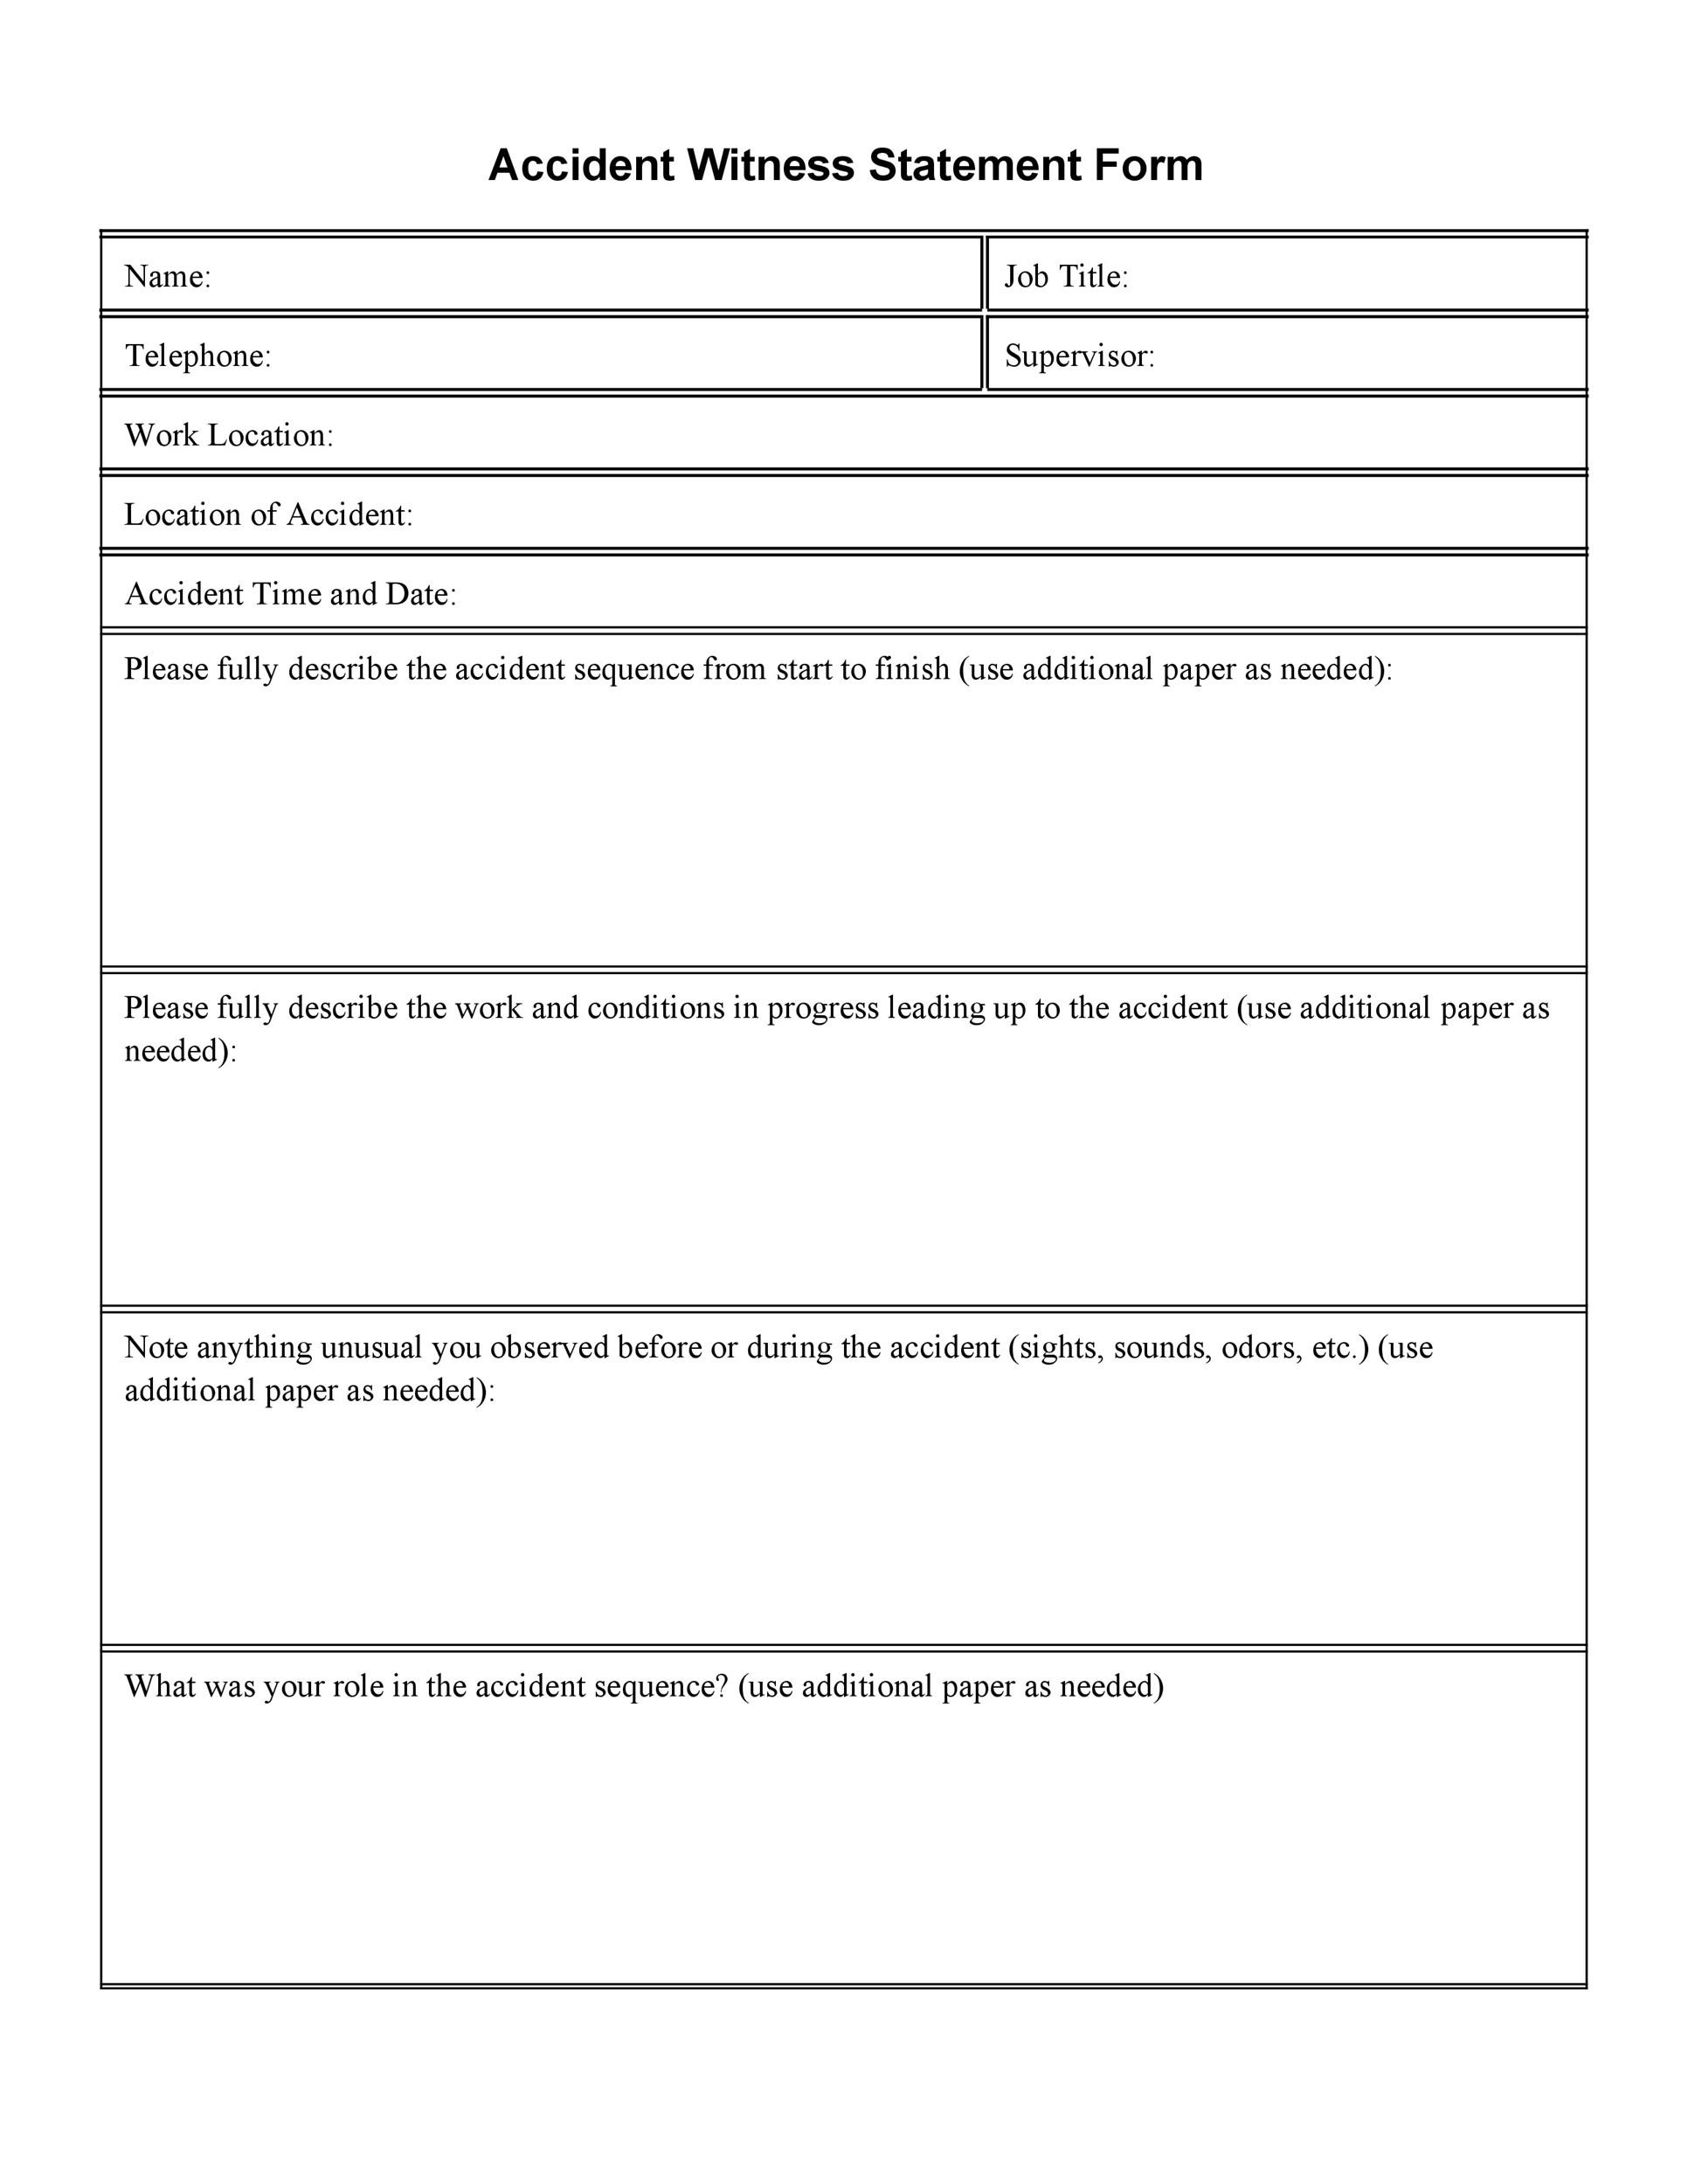 50-professional-witness-statement-forms-templates-templatelab